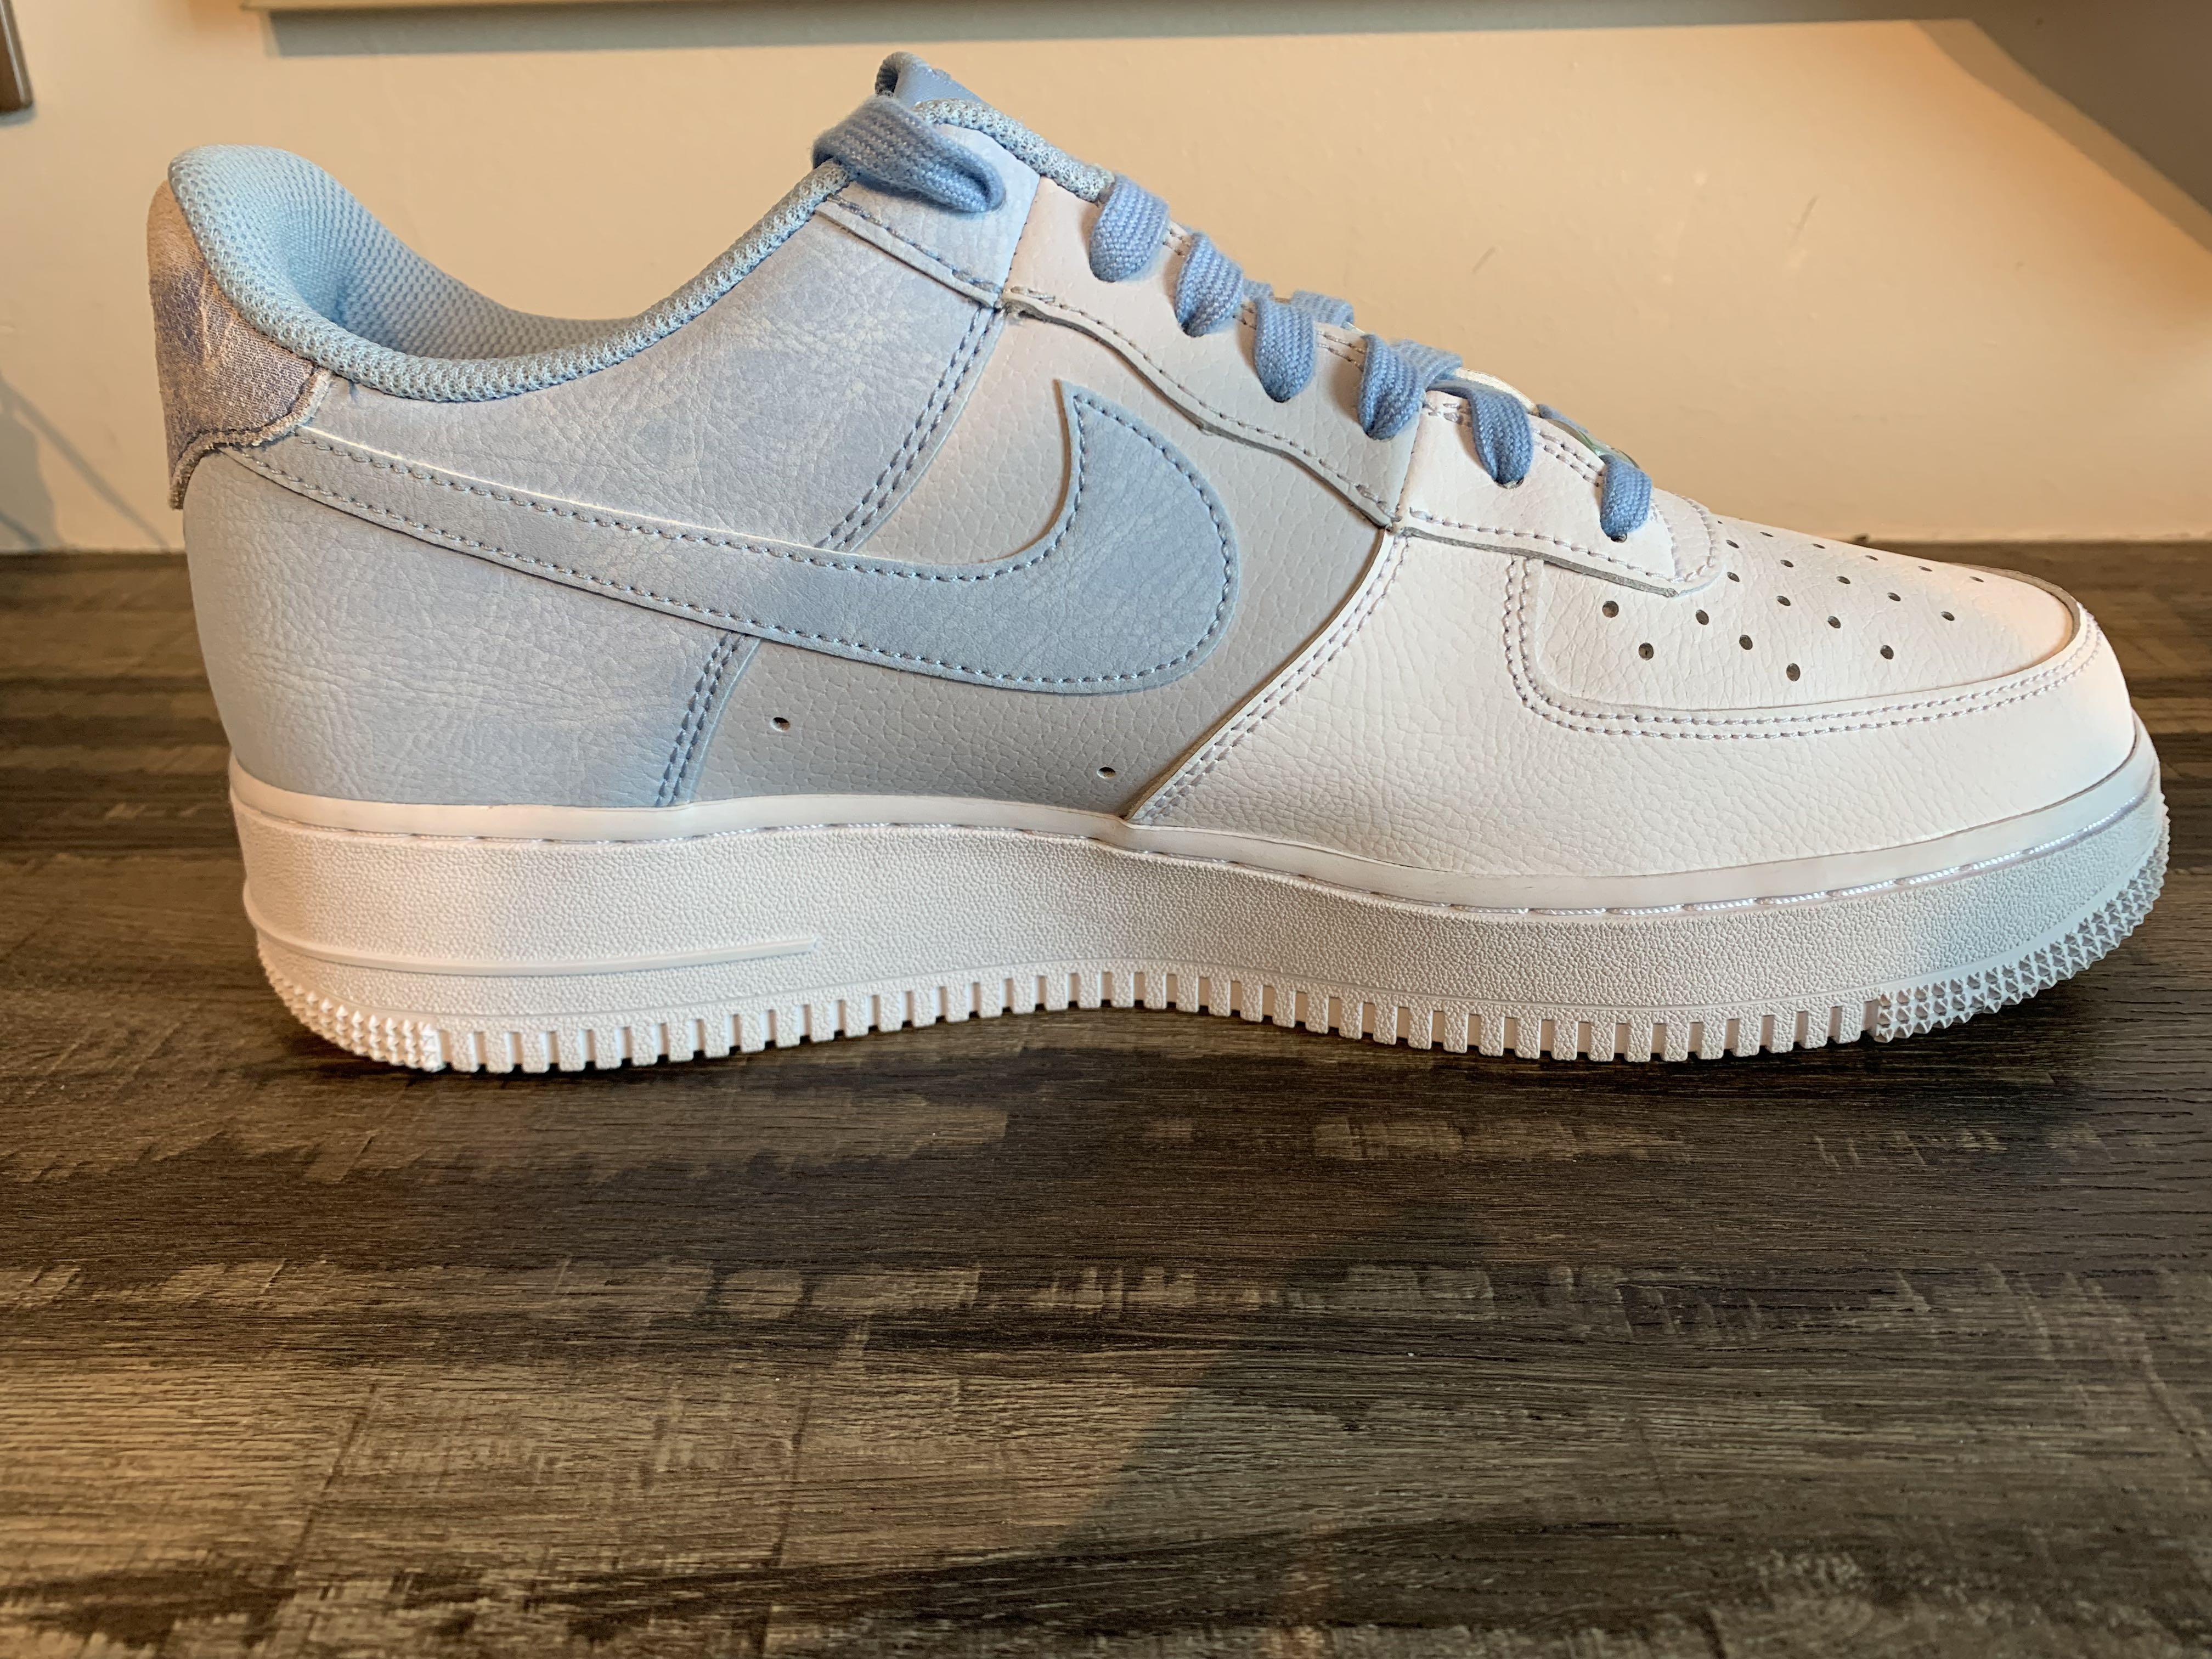 Nike Air Force 1 '07 LV8 Psychic Blue Shoes - Size 9.5